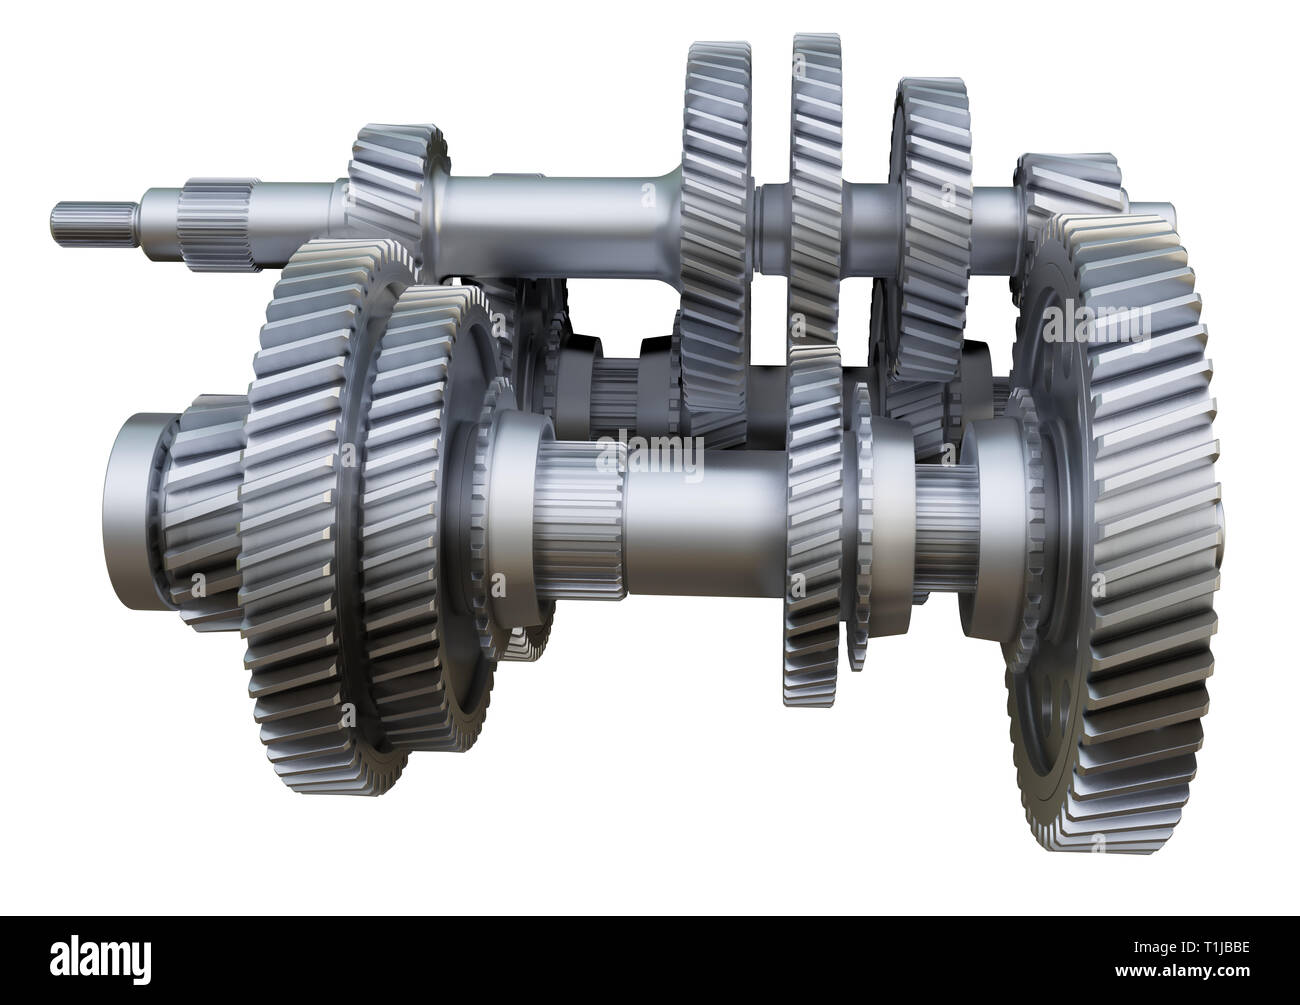 https://c8.alamy.com/comp/T1JBBE/gearbox-concept-metal-gears-shafts-and-bearings-T1JBBE.jpg